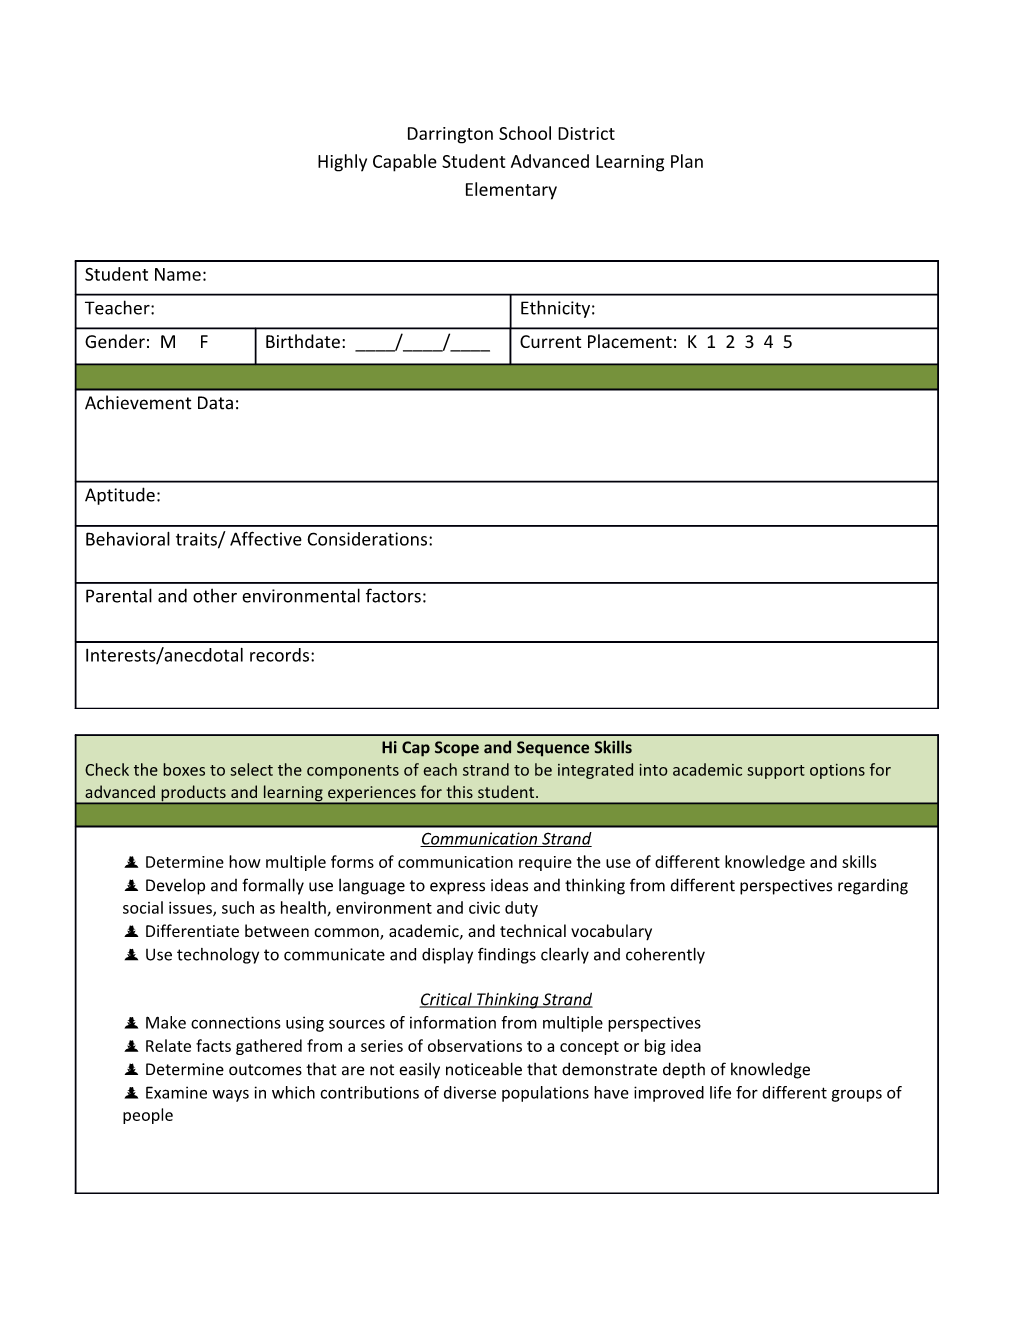 Highly Capable Student Advanced Learning Plan